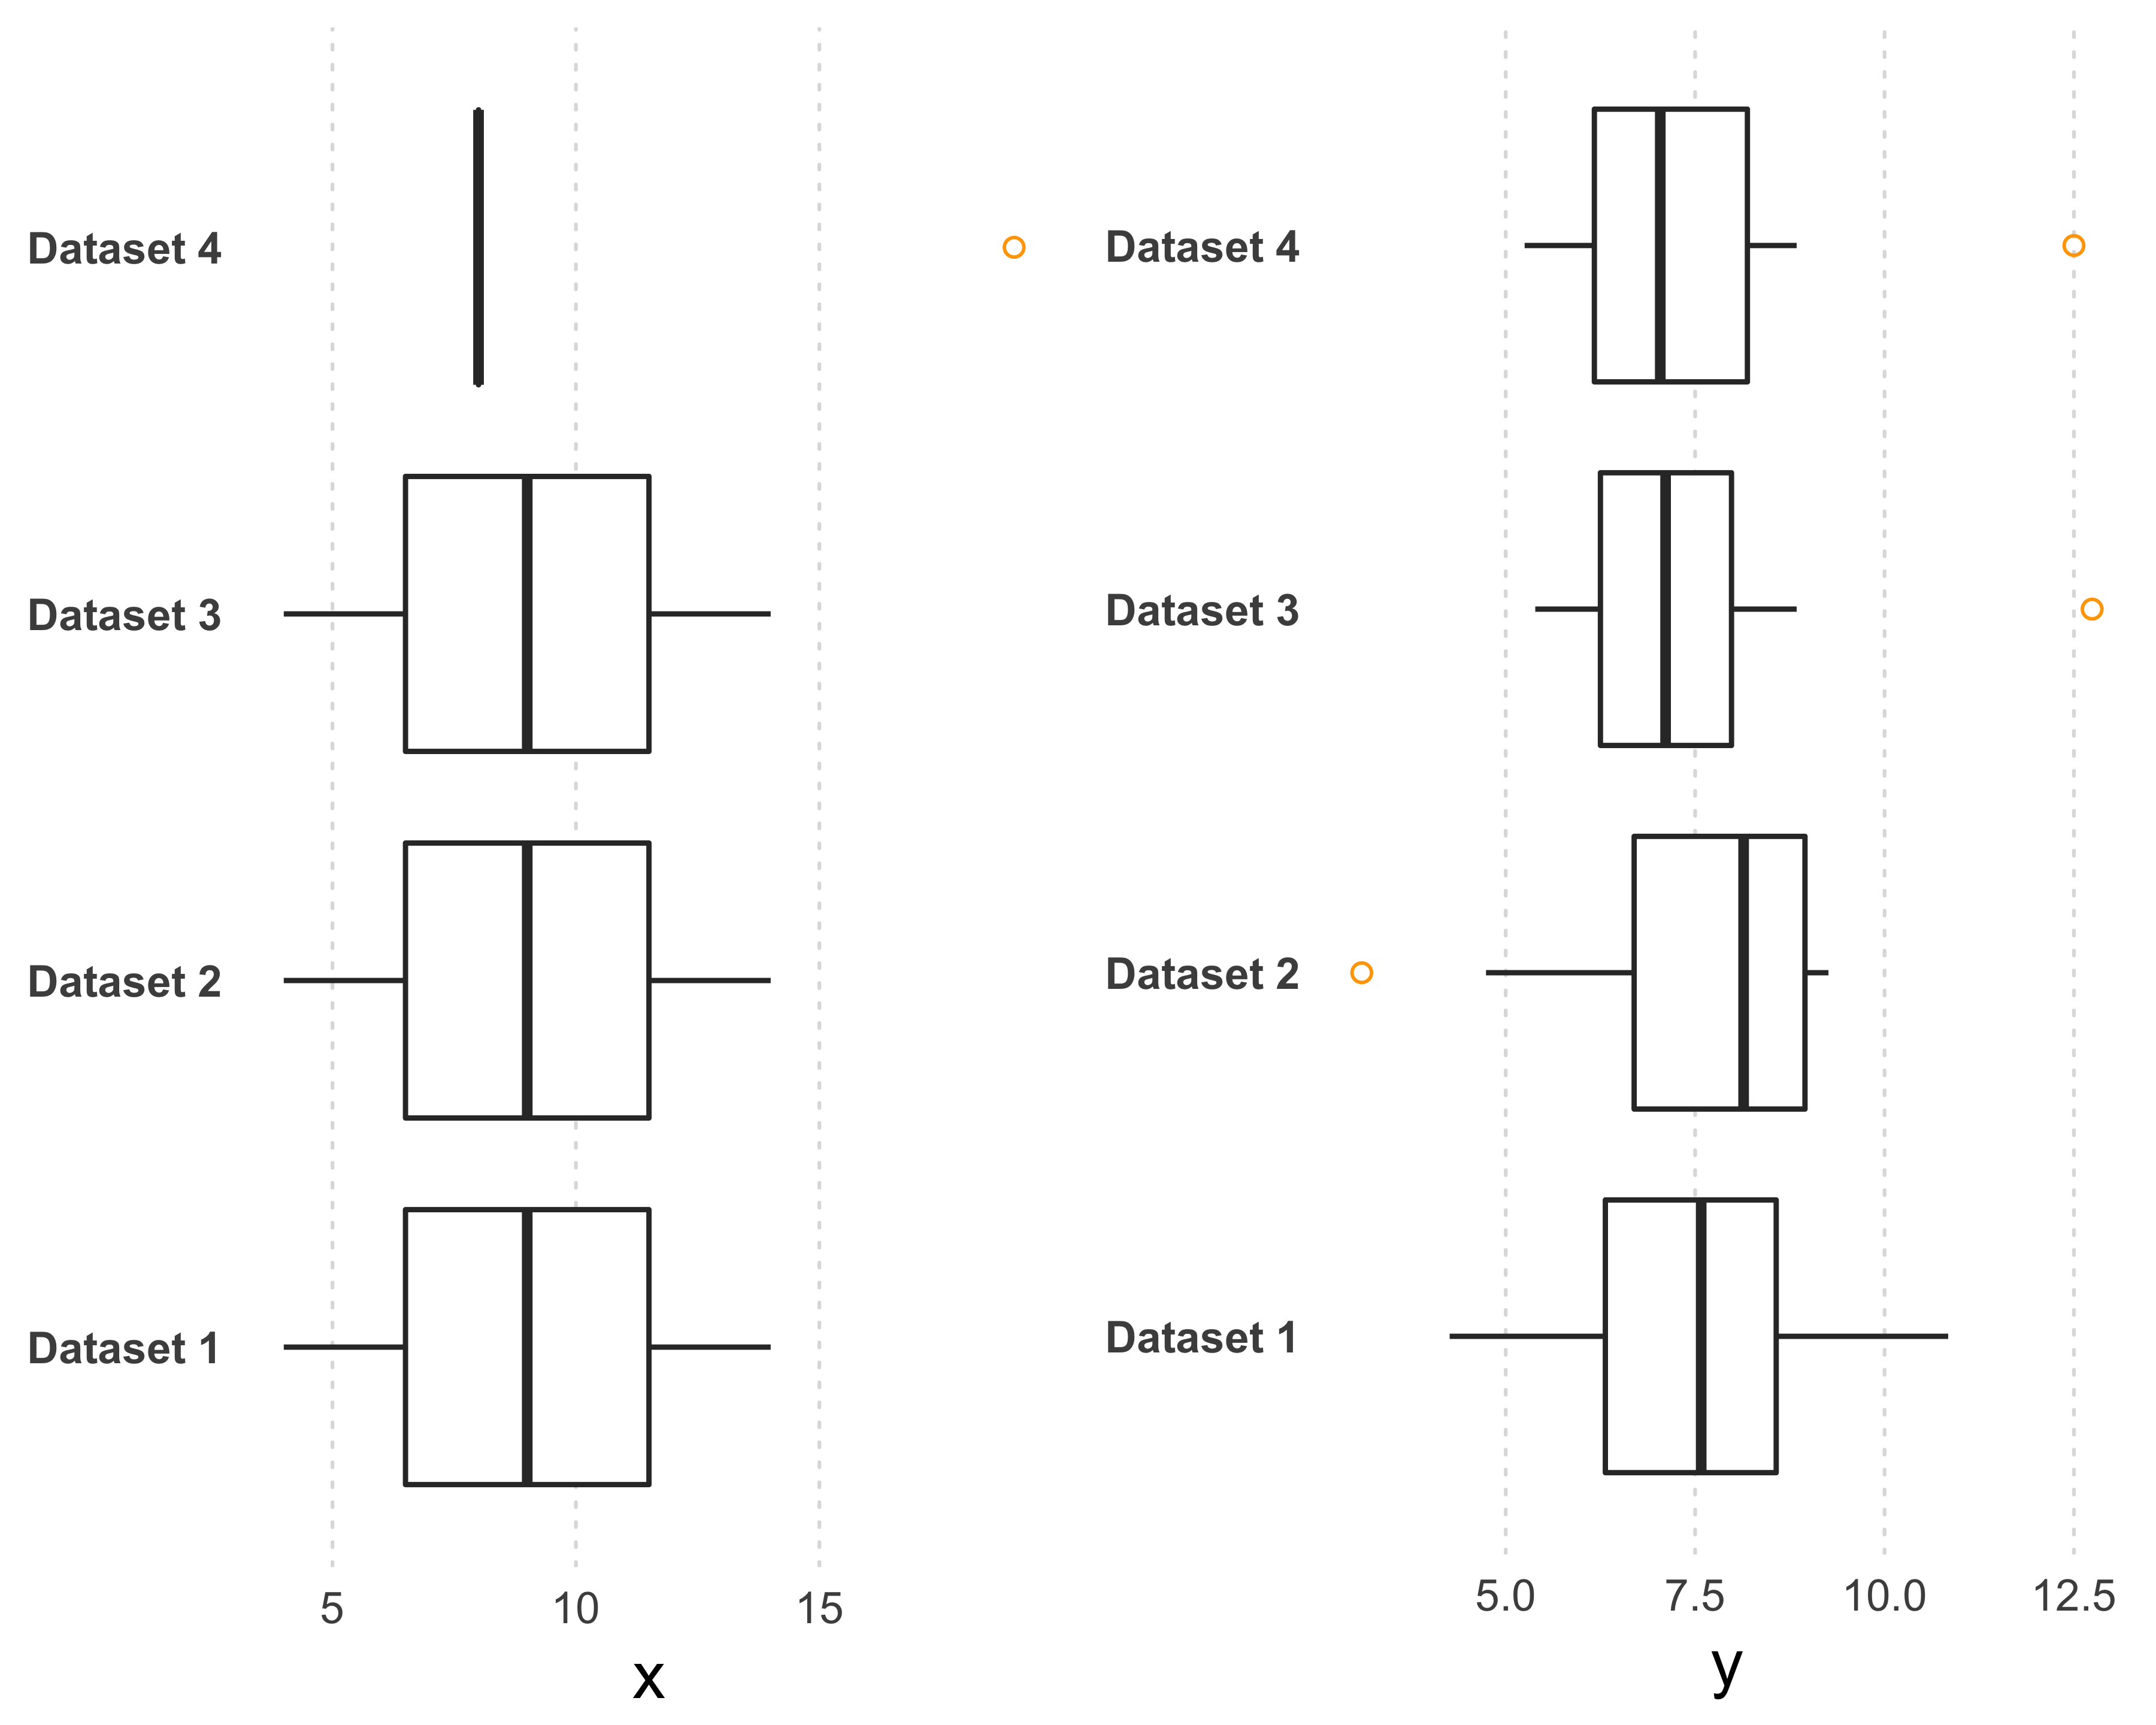 Anscombe's quartet: four different data sets with similar statistical distributions